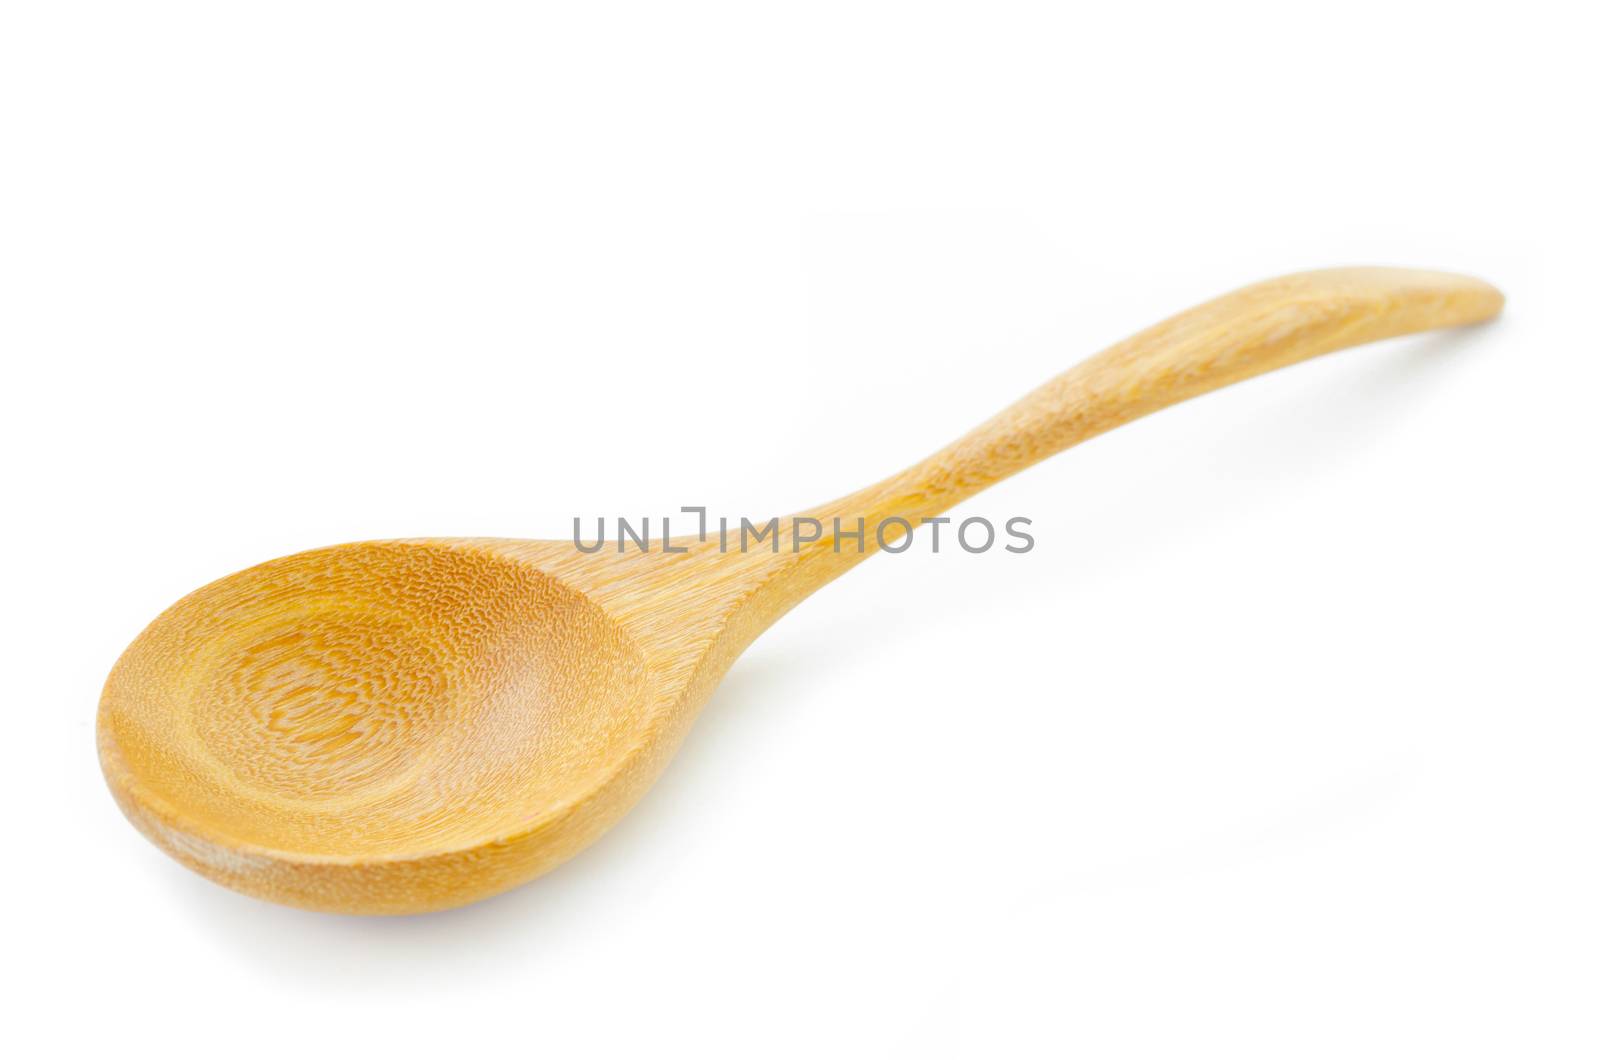 Used wooden spoon isolated on white background.